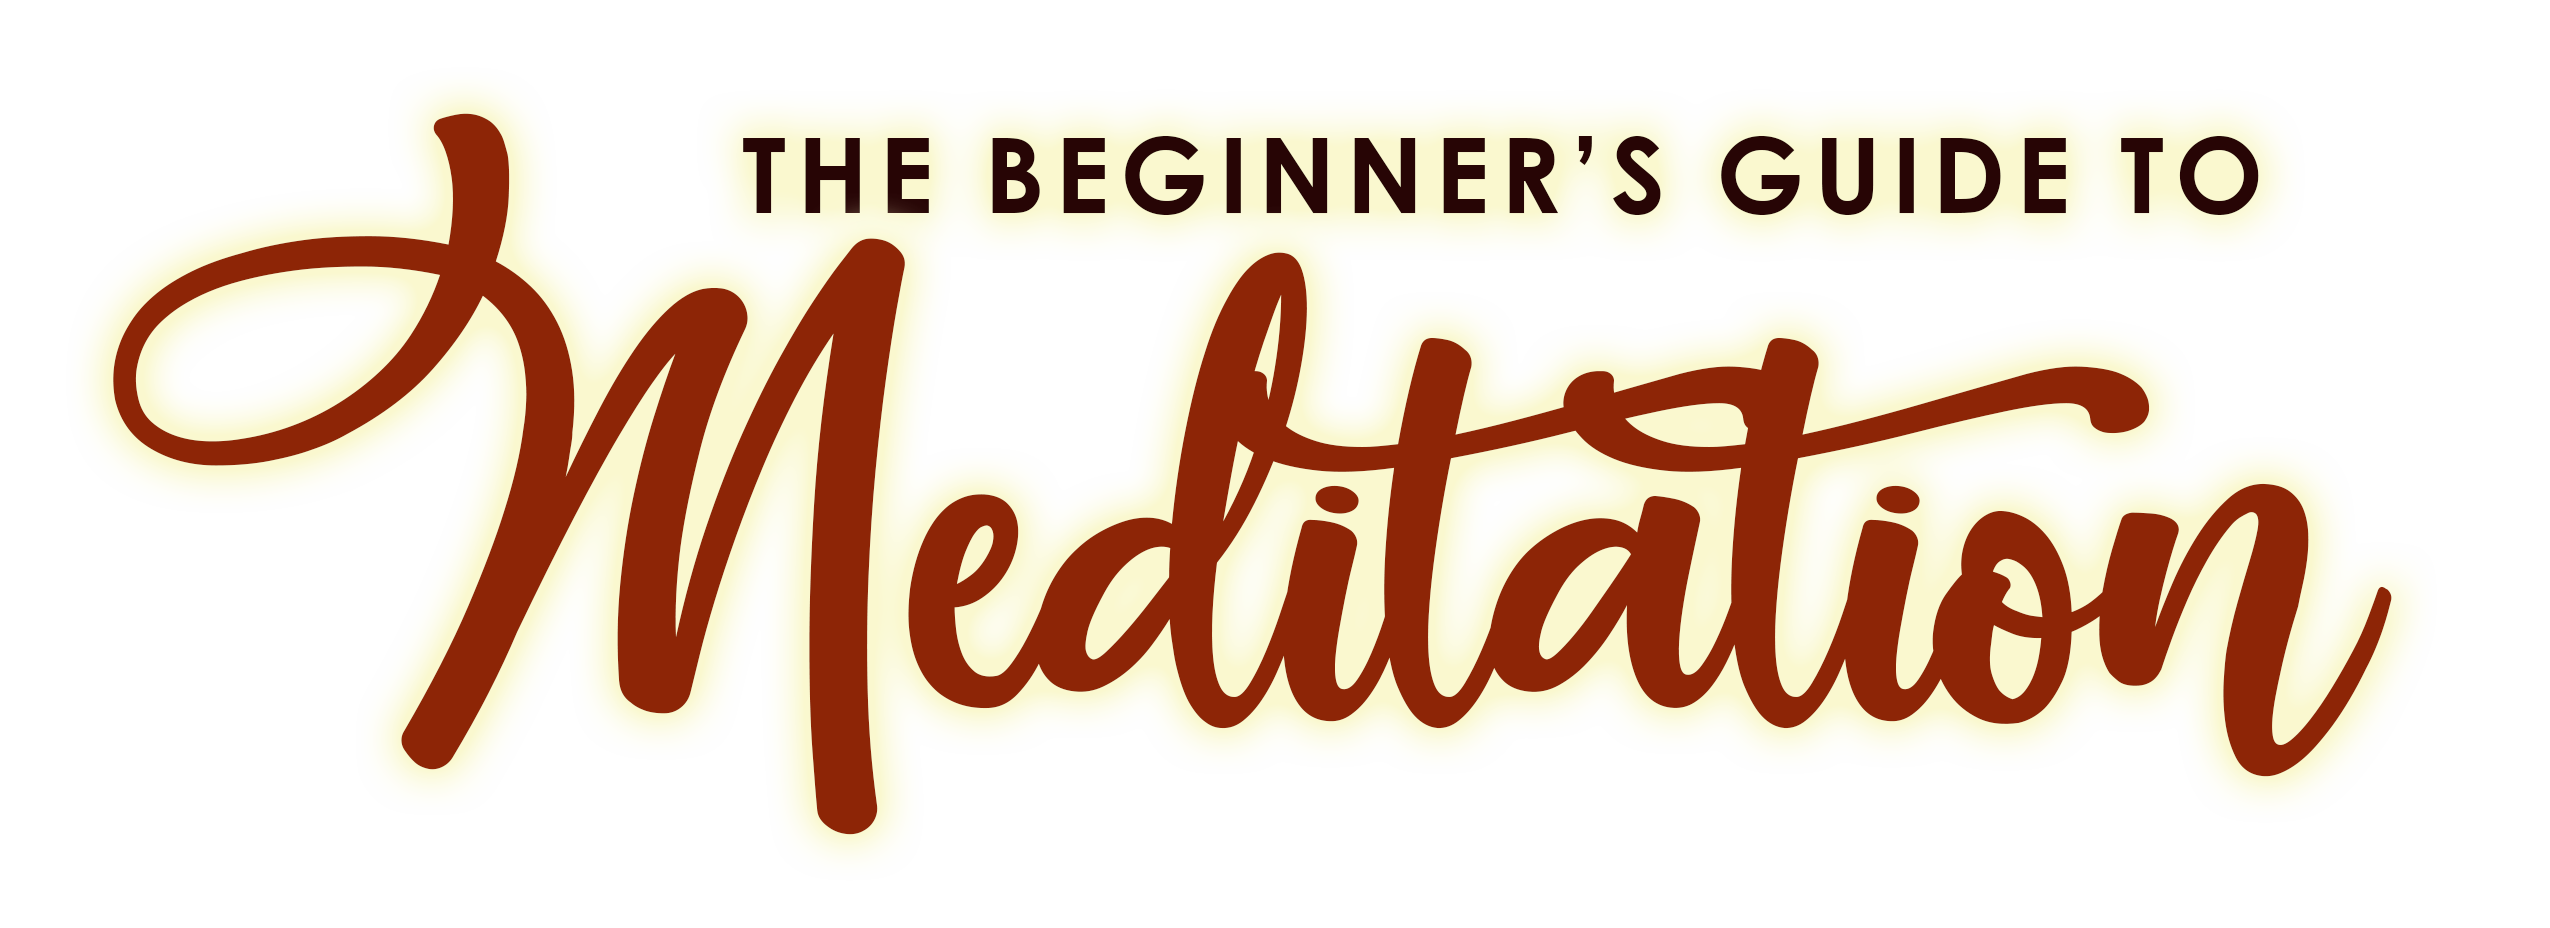 AThe Beginners Guide To Meditation 